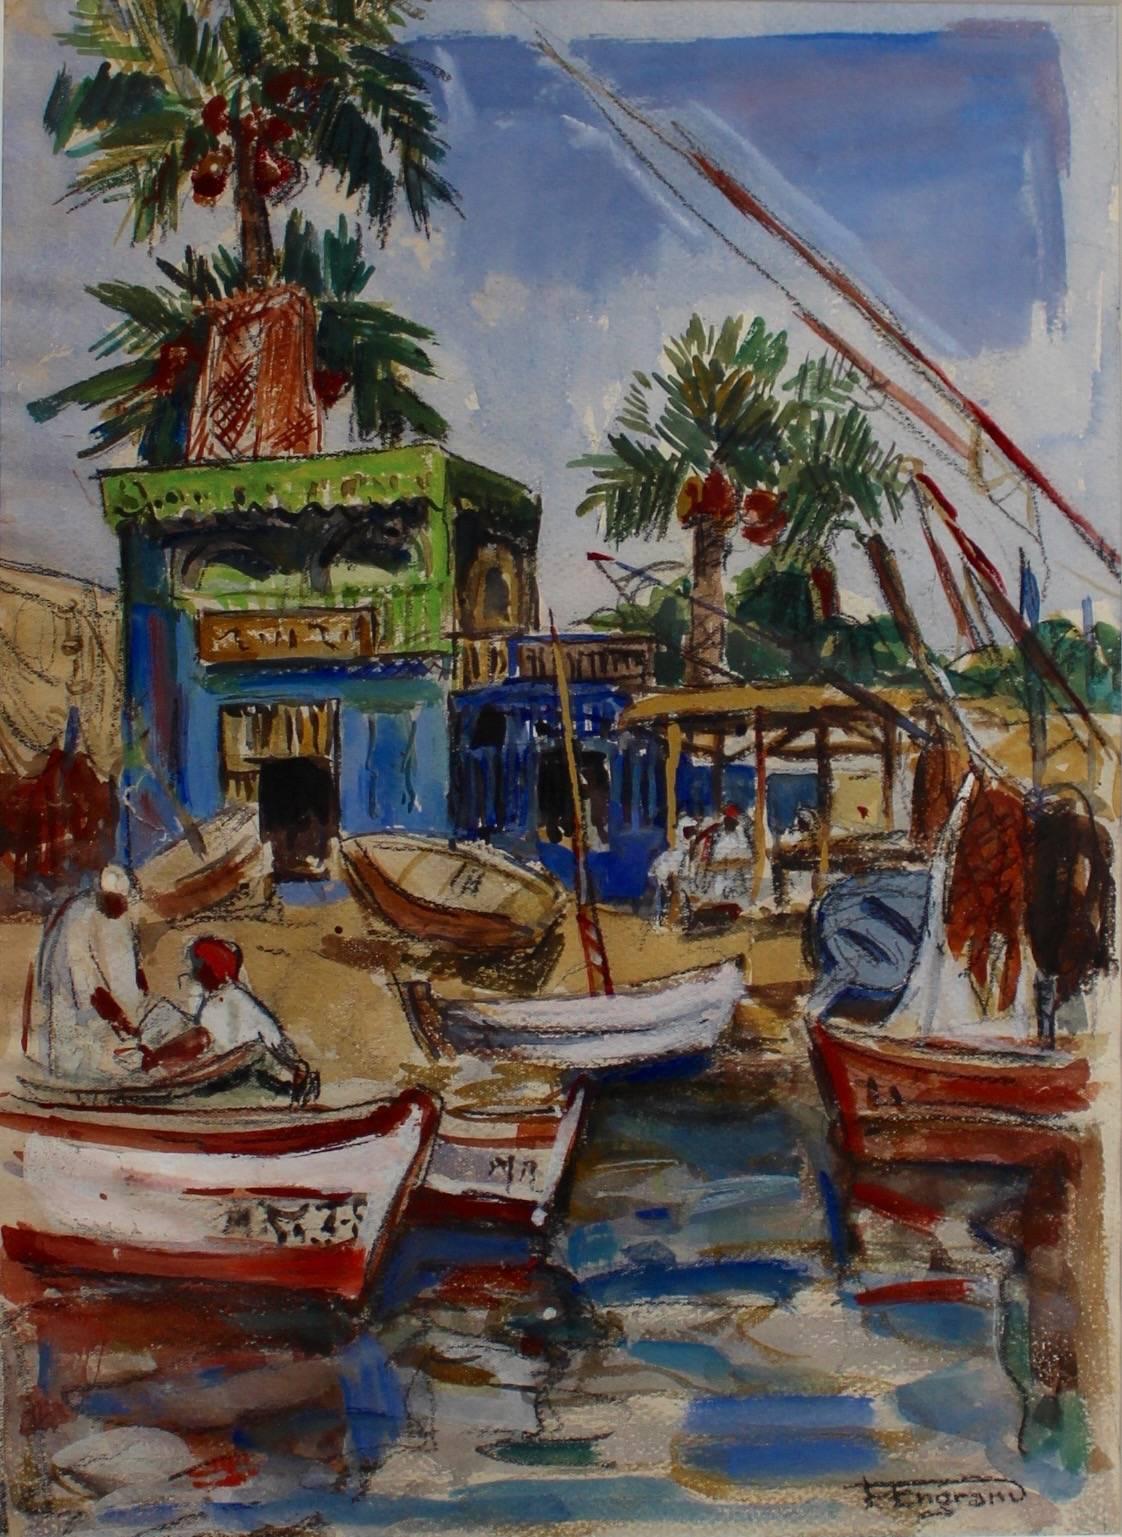 'Mediterranean Fishing Village' by F Engram - Painting by Unknown